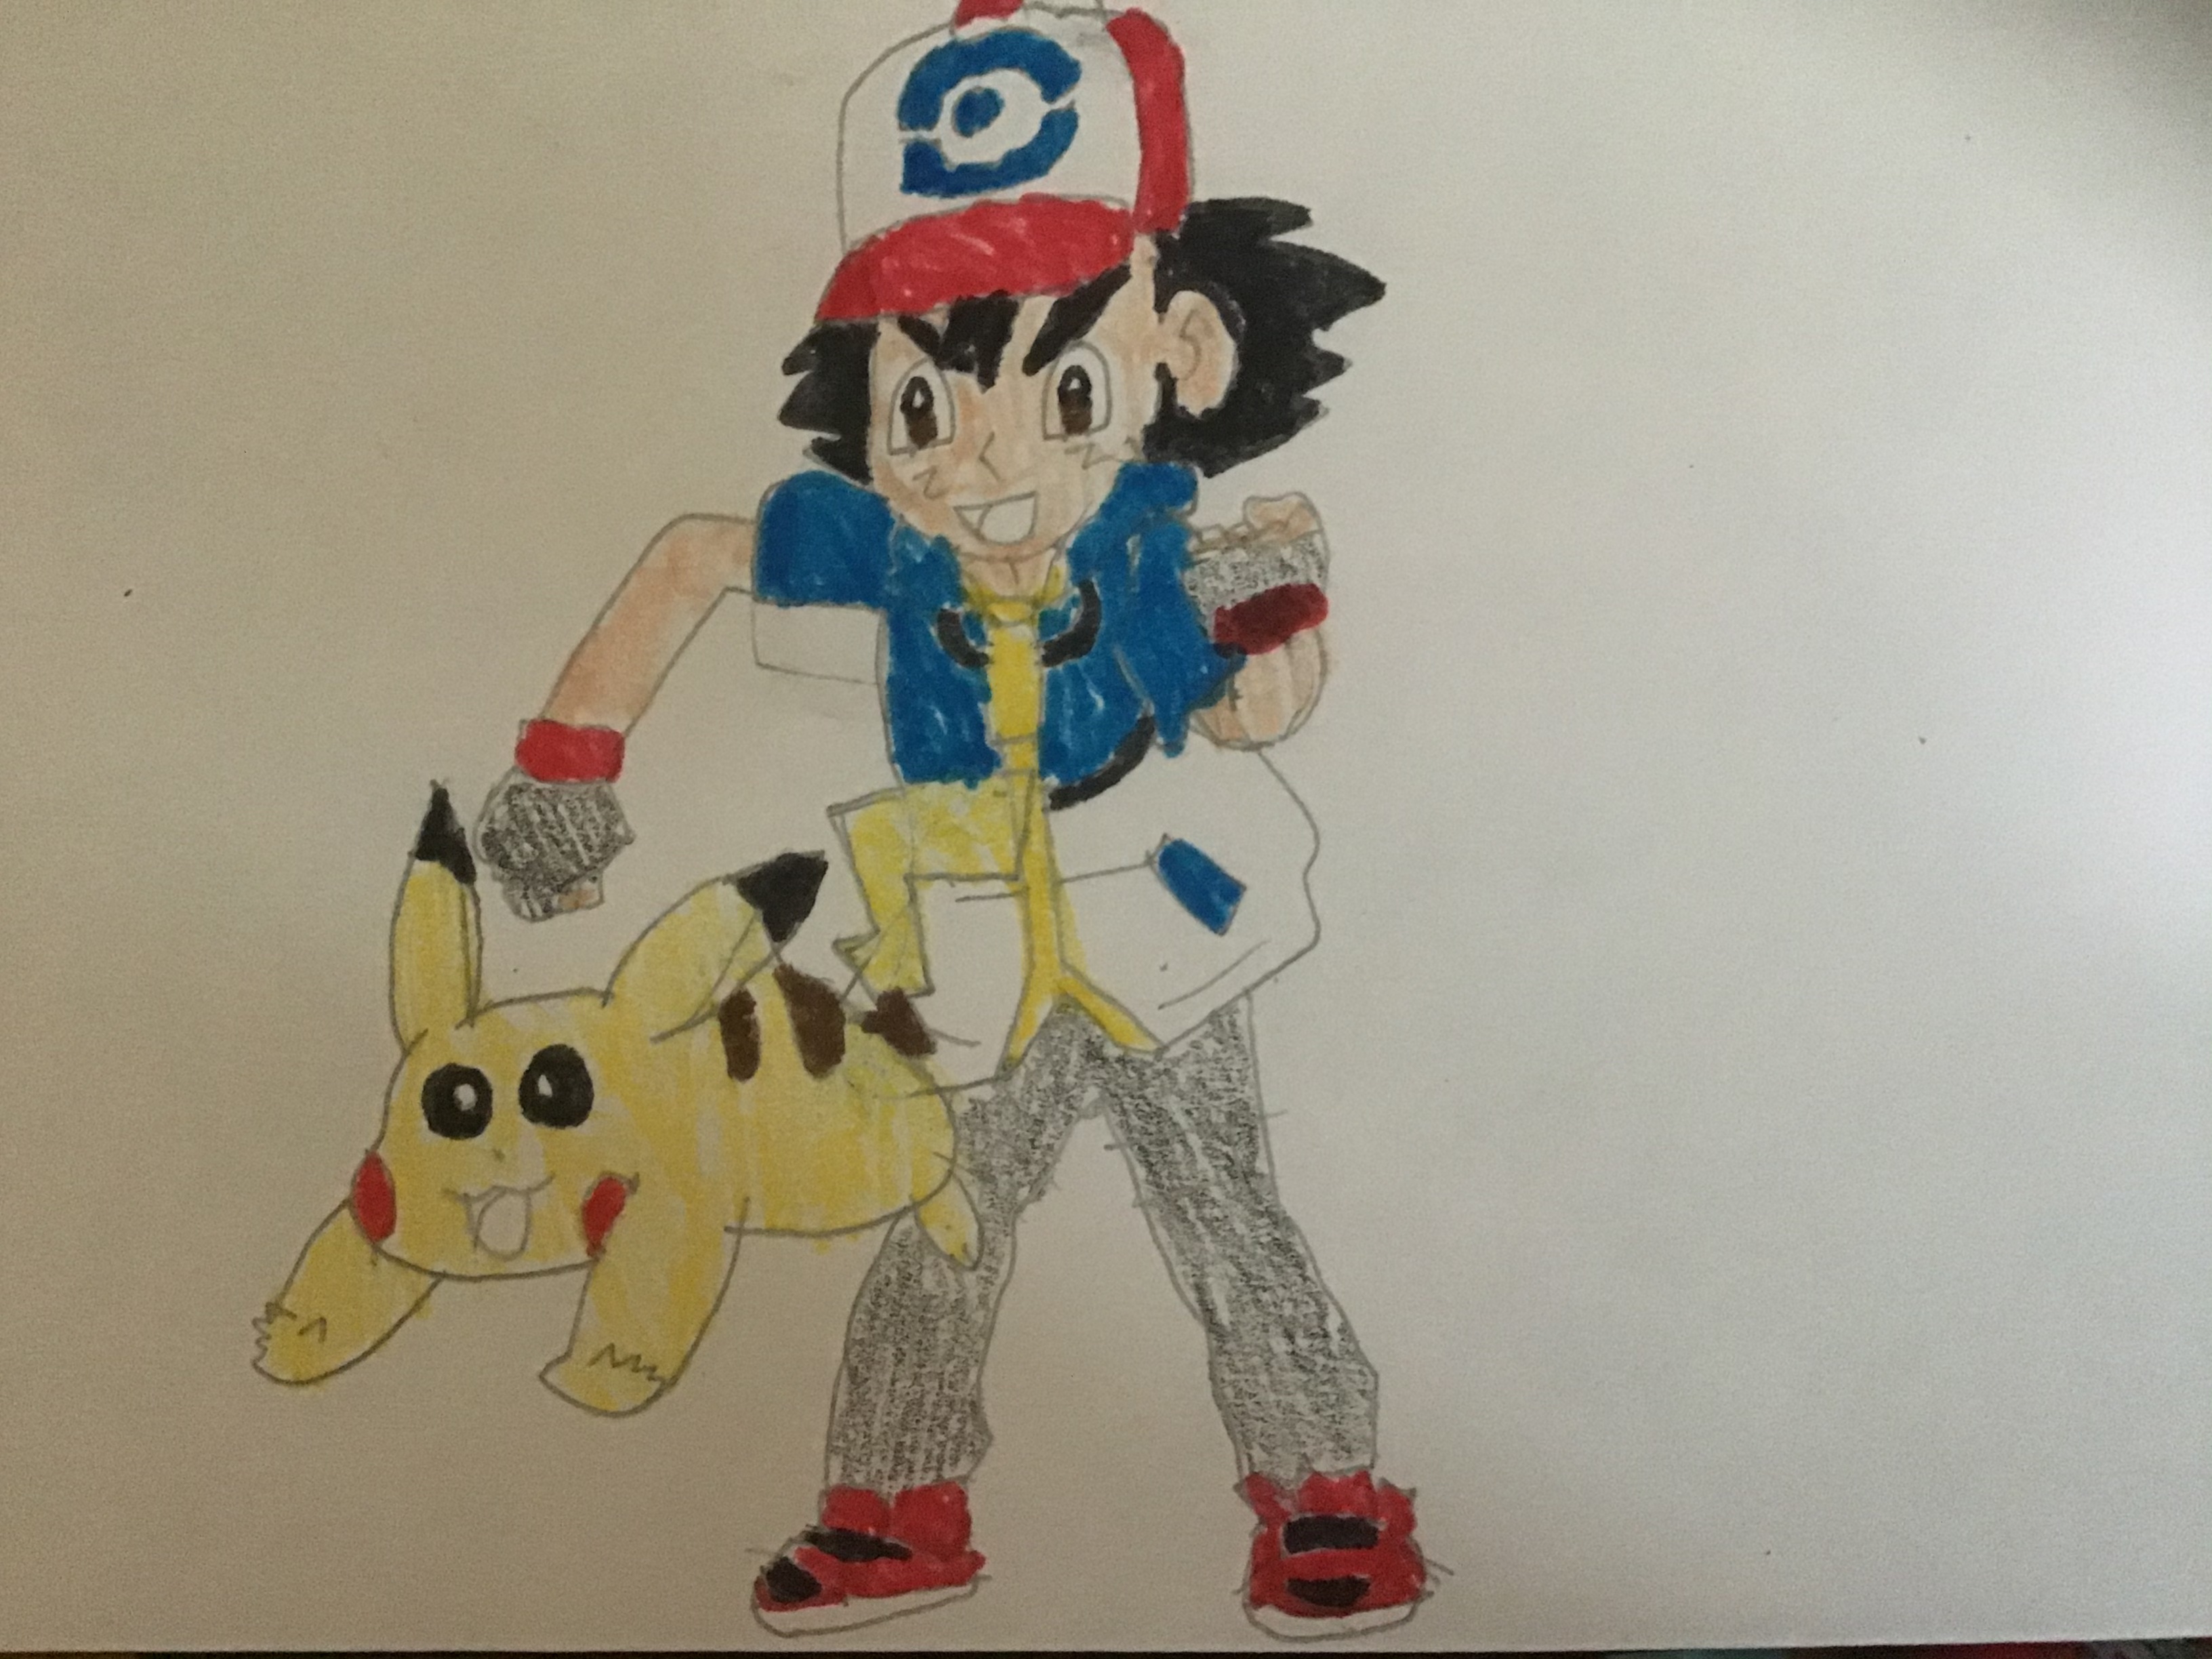 Nice drawing of Pikachu and Ash by @juan.alczr5 Go give him a